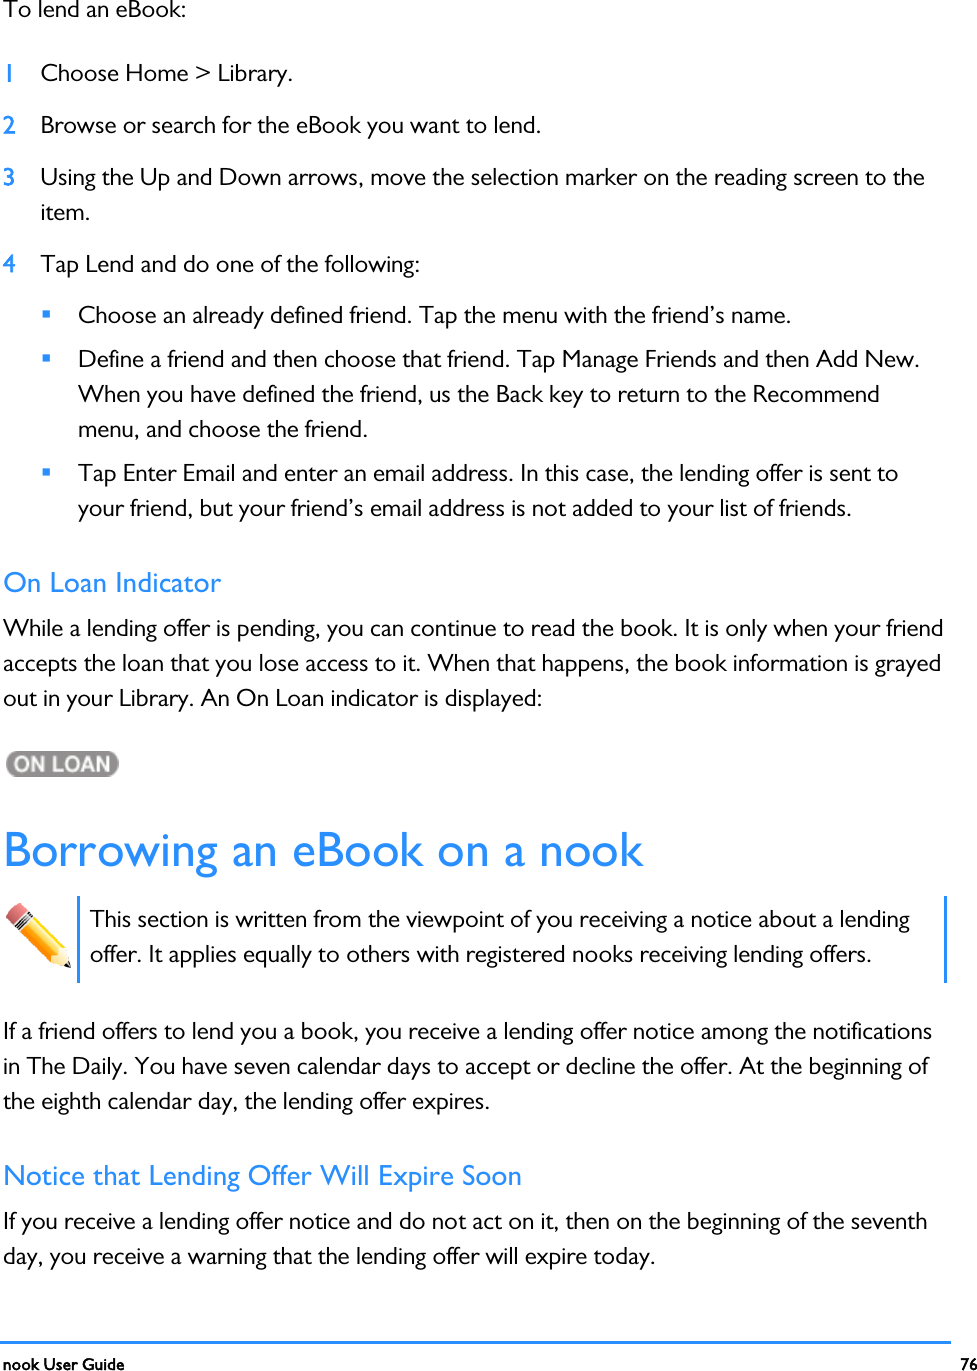  nook User Guide    76        To lend an eBook: 1 Choose Home &gt; Library. 2 Browse or search for the eBook you want to lend. 3 Using the Up and Down arrows, move the selection marker on the reading screen to the item.  4 Tap Lend and do one of the following:  Choose an already defined friend. Tap the menu with the friend’s name.  Define a friend and then choose that friend. Tap Manage Friends and then Add New. When you have defined the friend, us the Back key to return to the Recommend menu, and choose the friend.  Tap Enter Email and enter an email address. In this case, the lending offer is sent to your friend, but your friend’s email address is not added to your list of friends. On Loan Indicator While a lending offer is pending, you can continue to read the book. It is only when your friend accepts the loan that you lose access to it. When that happens, the book information is grayed out in your Library. An On Loan indicator is displayed:  Borrowing an eBook on a nook  This section is written from the viewpoint of you receiving a notice about a lending offer. It applies equally to others with registered nooks receiving lending offers. If a friend offers to lend you a book, you receive a lending offer notice among the notifications in The Daily. You have seven calendar days to accept or decline the offer. At the beginning of the eighth calendar day, the lending offer expires. Notice that Lending Offer Will Expire Soon If you receive a lending offer notice and do not act on it, then on the beginning of the seventh day, you receive a warning that the lending offer will expire today. 